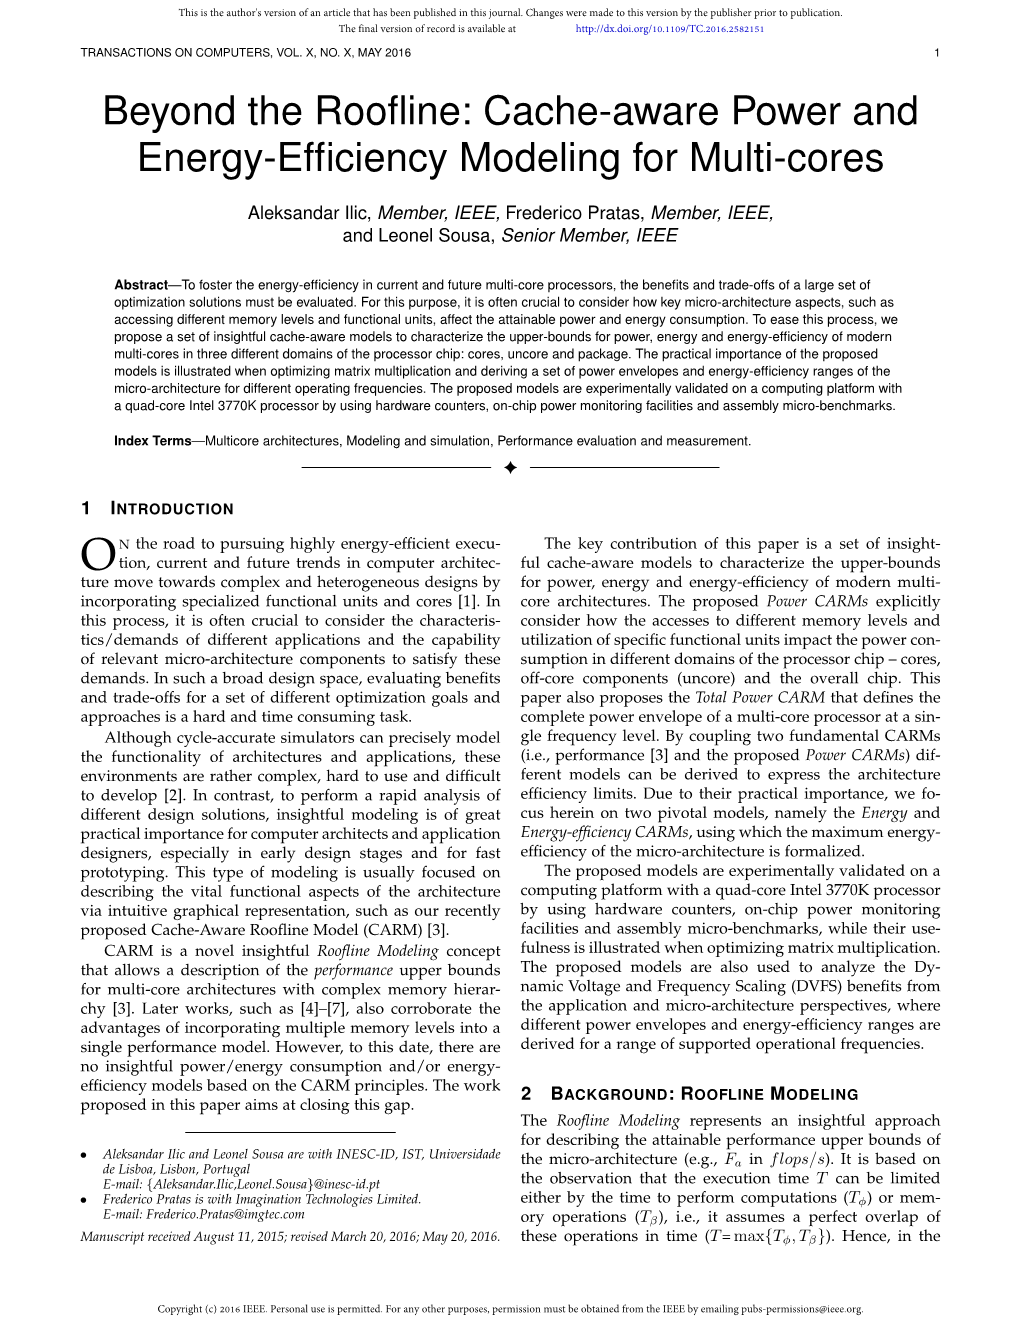 Beyond the Roofline: Cache-Aware Power and Energy-Efficiency